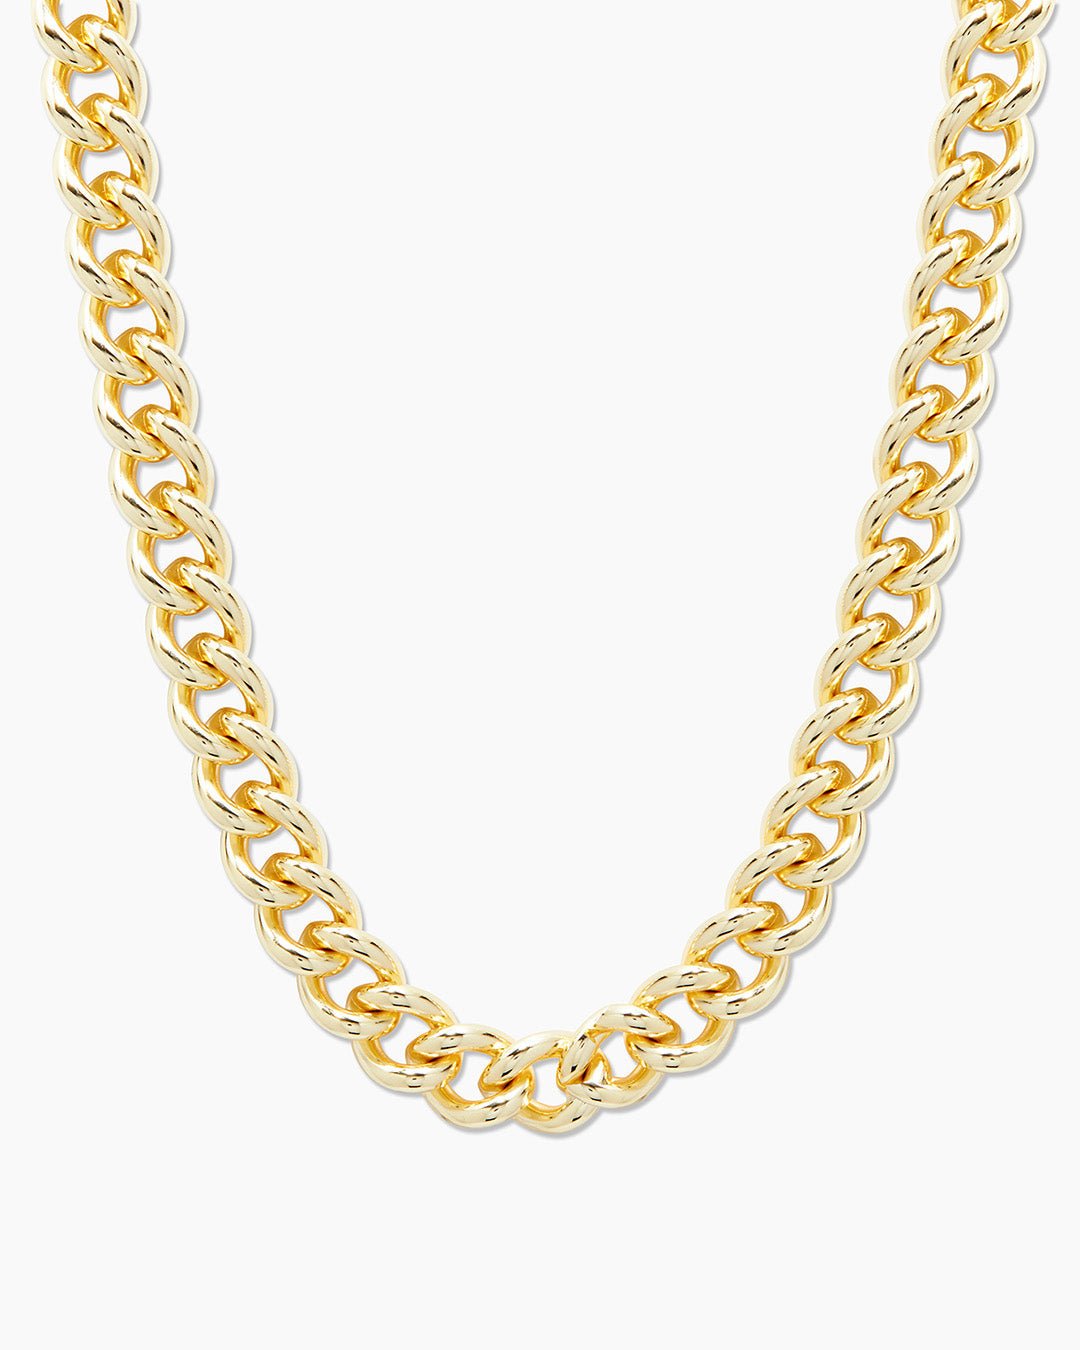 Gold | gorjana Jewelry | Lou Link Necklace | gold chunky chain necklace | statement necklace | holiday party necklace